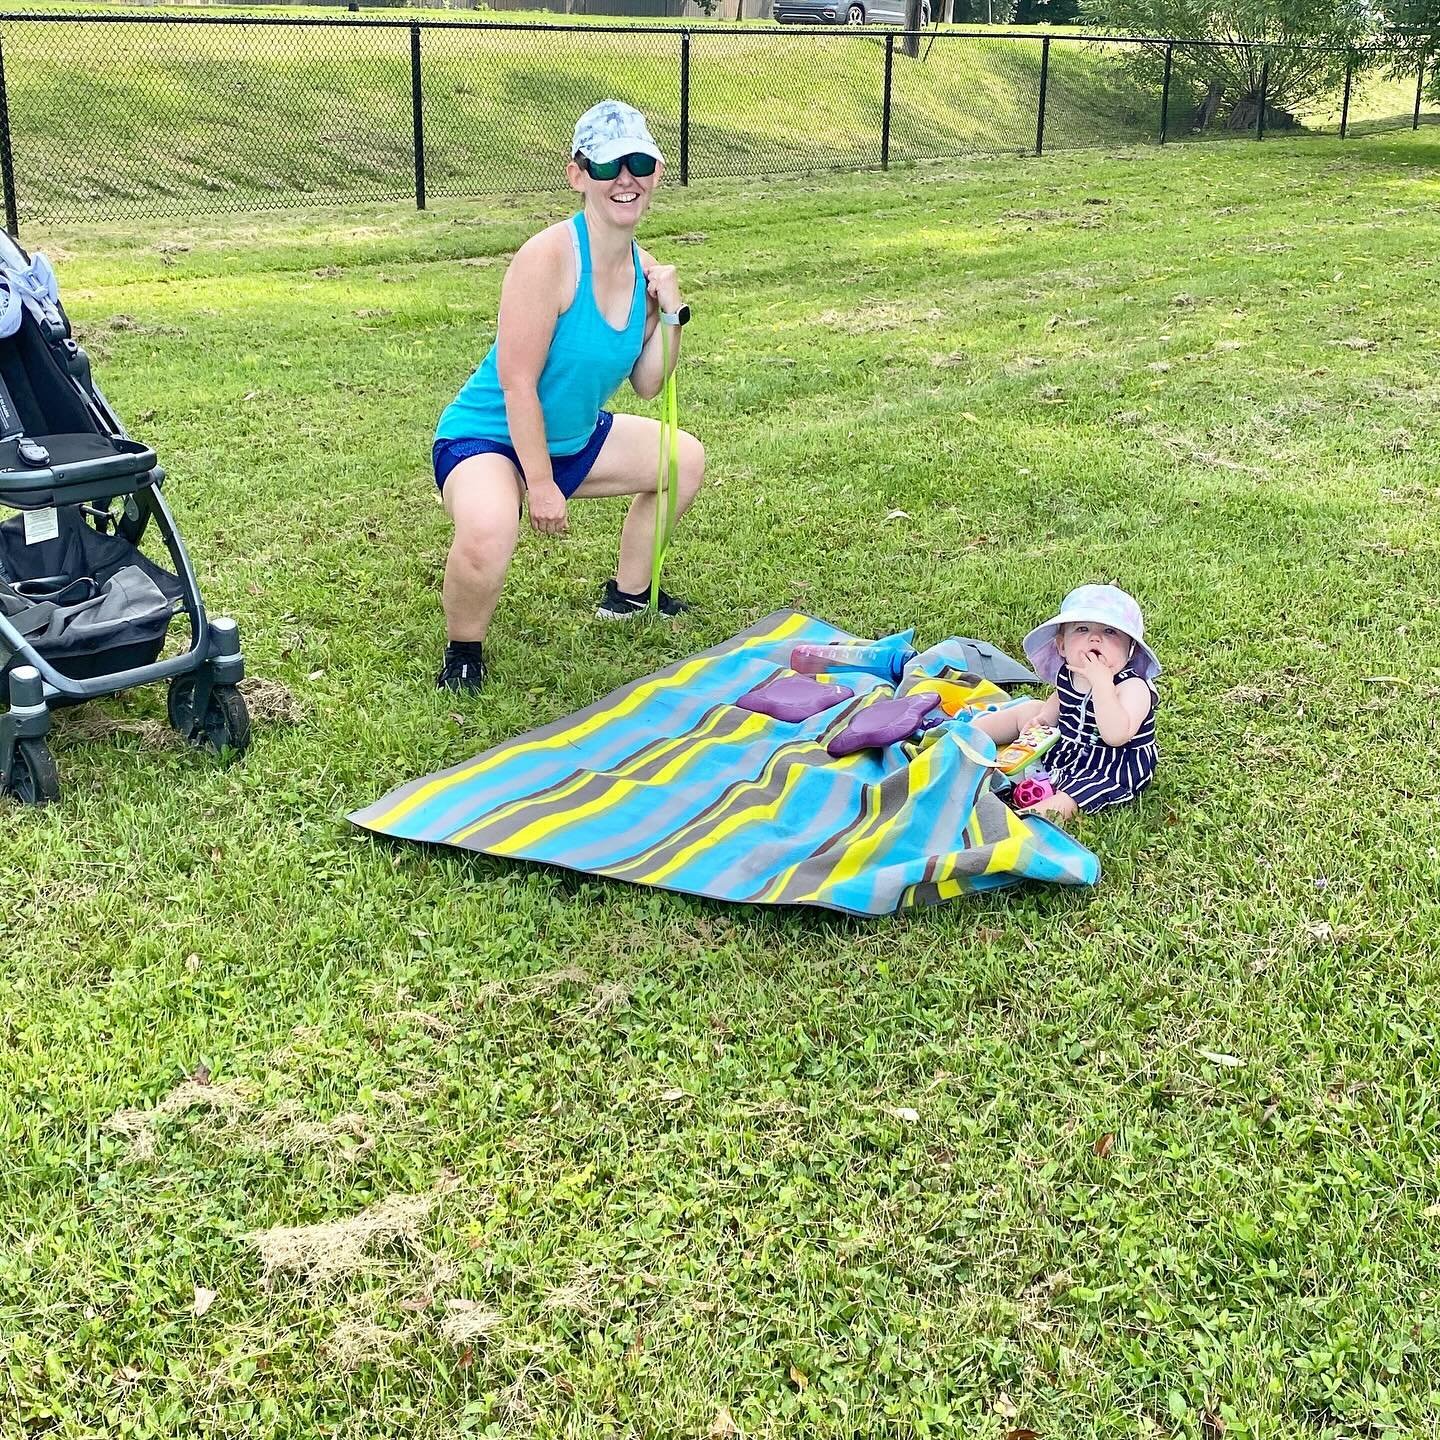 Who&rsquo;s ready for the sunshine and fresh air on their skin? 

Our outdoor Stroller Strong classes start the week of May 21! We will continue to run them all summer long! 

I am super excited to welcome back so many familiar faces and meet some ne